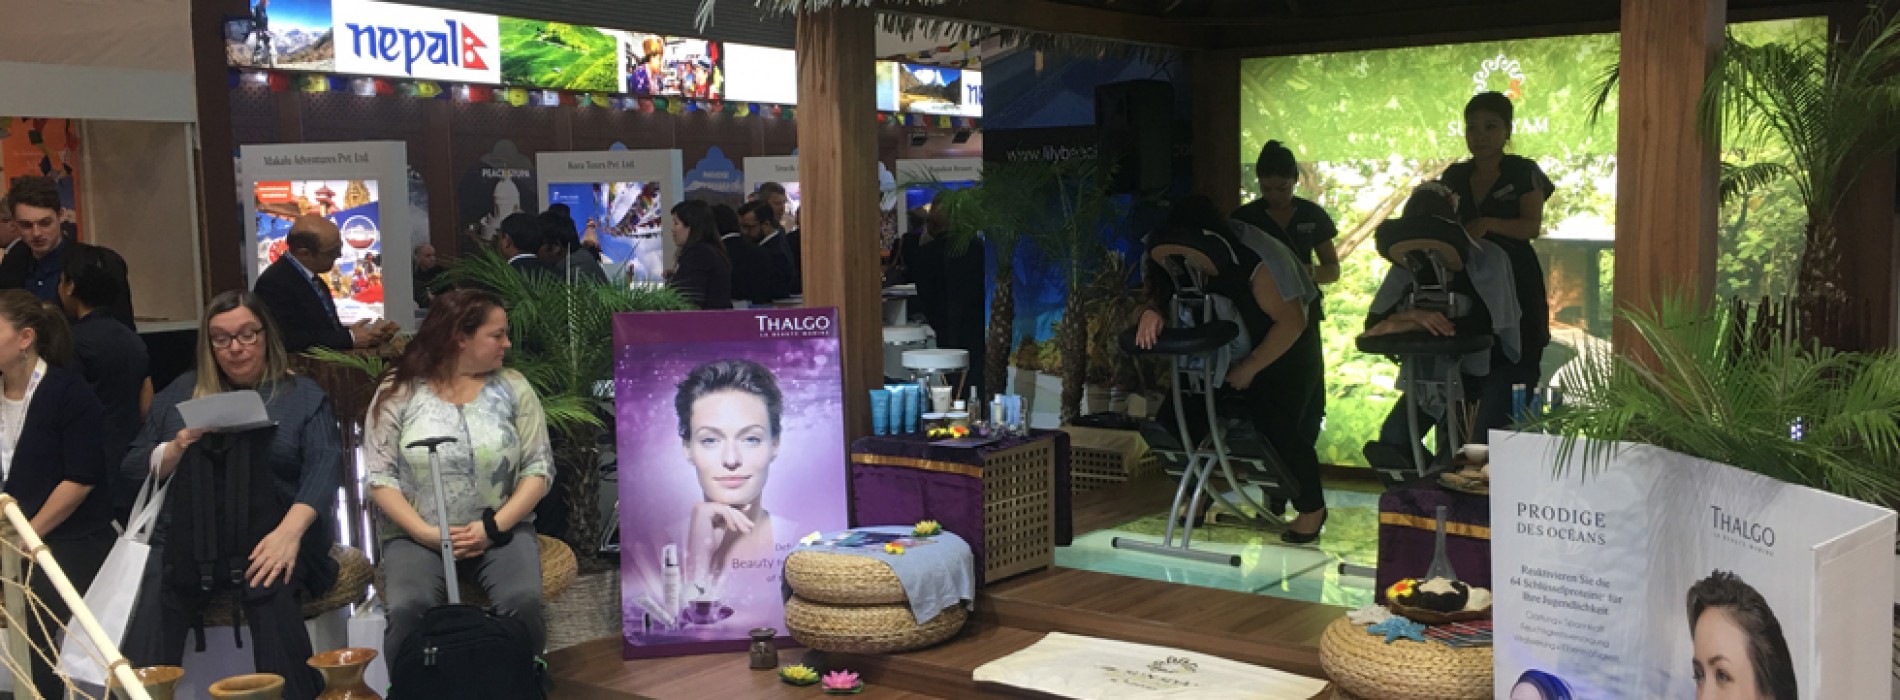 Maldives showcases destination experiences at the World’s leading Travel trade show, ITB